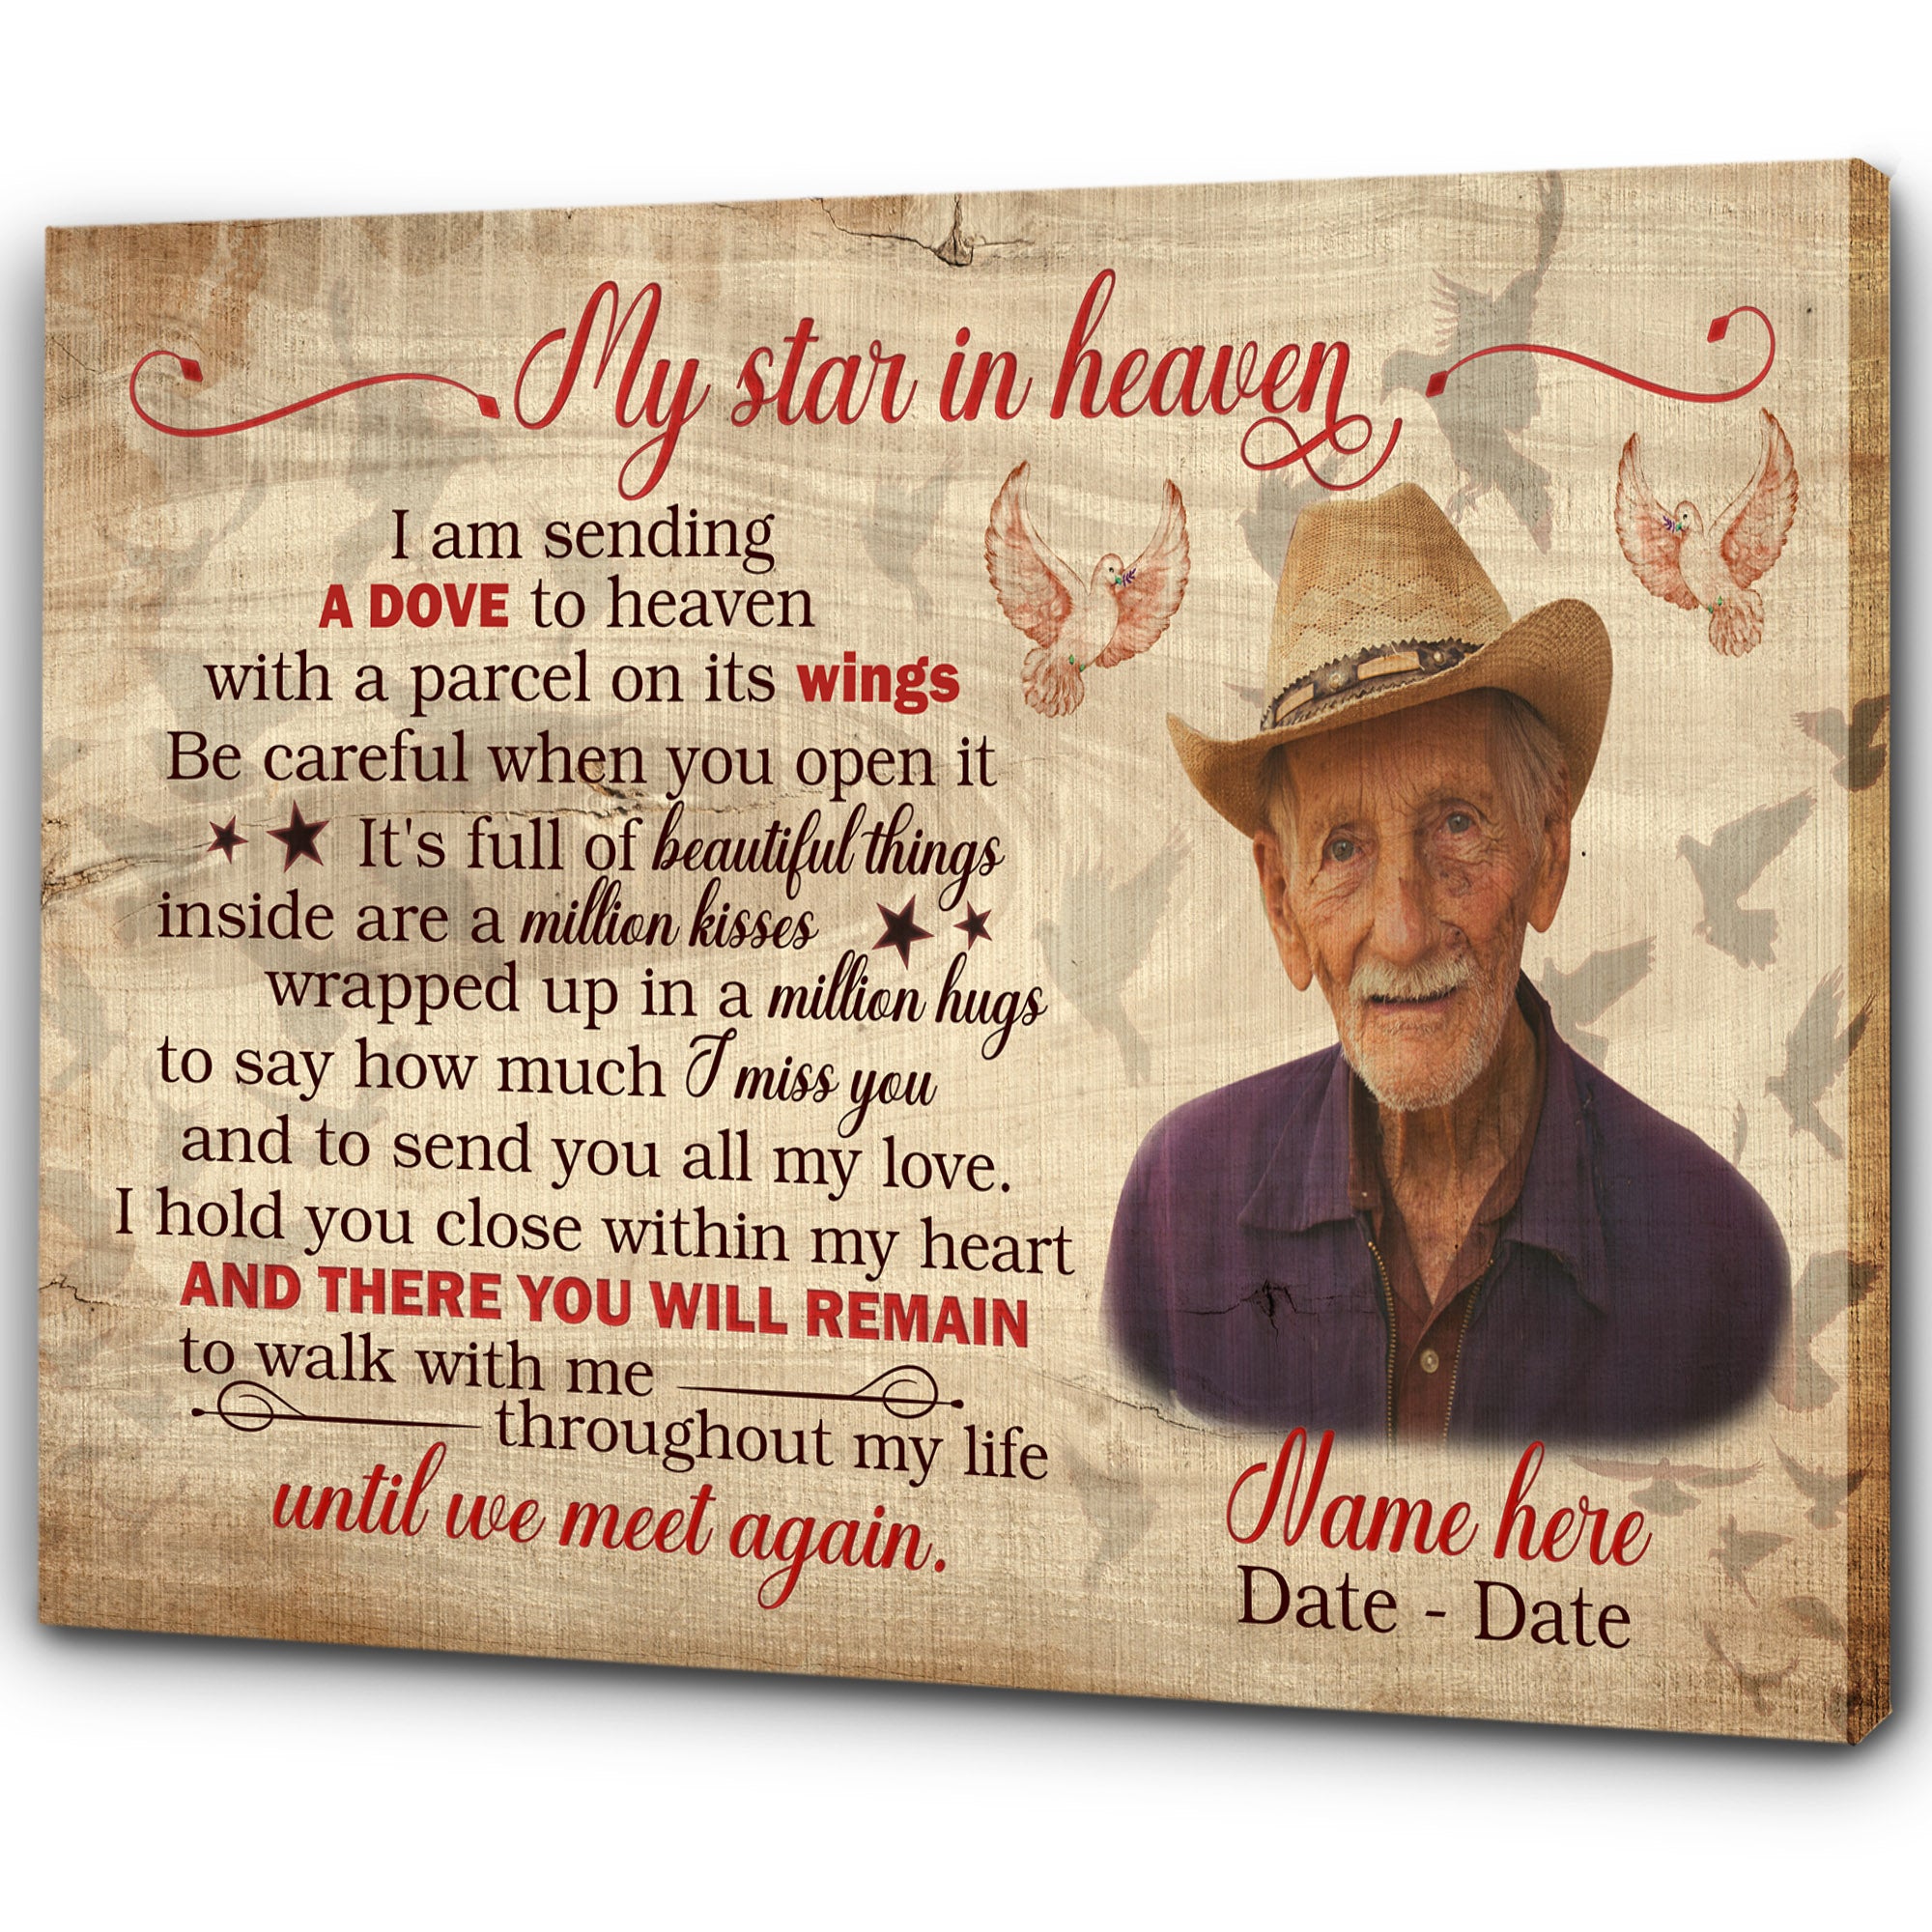 Personalized Canvas| My Star In Heaven Sympathy Gift| In Loving Memory of Husband| Memorial Gift for Loss of Husband, Father on Father's Day, Birthday, Christmas & New Year| T144